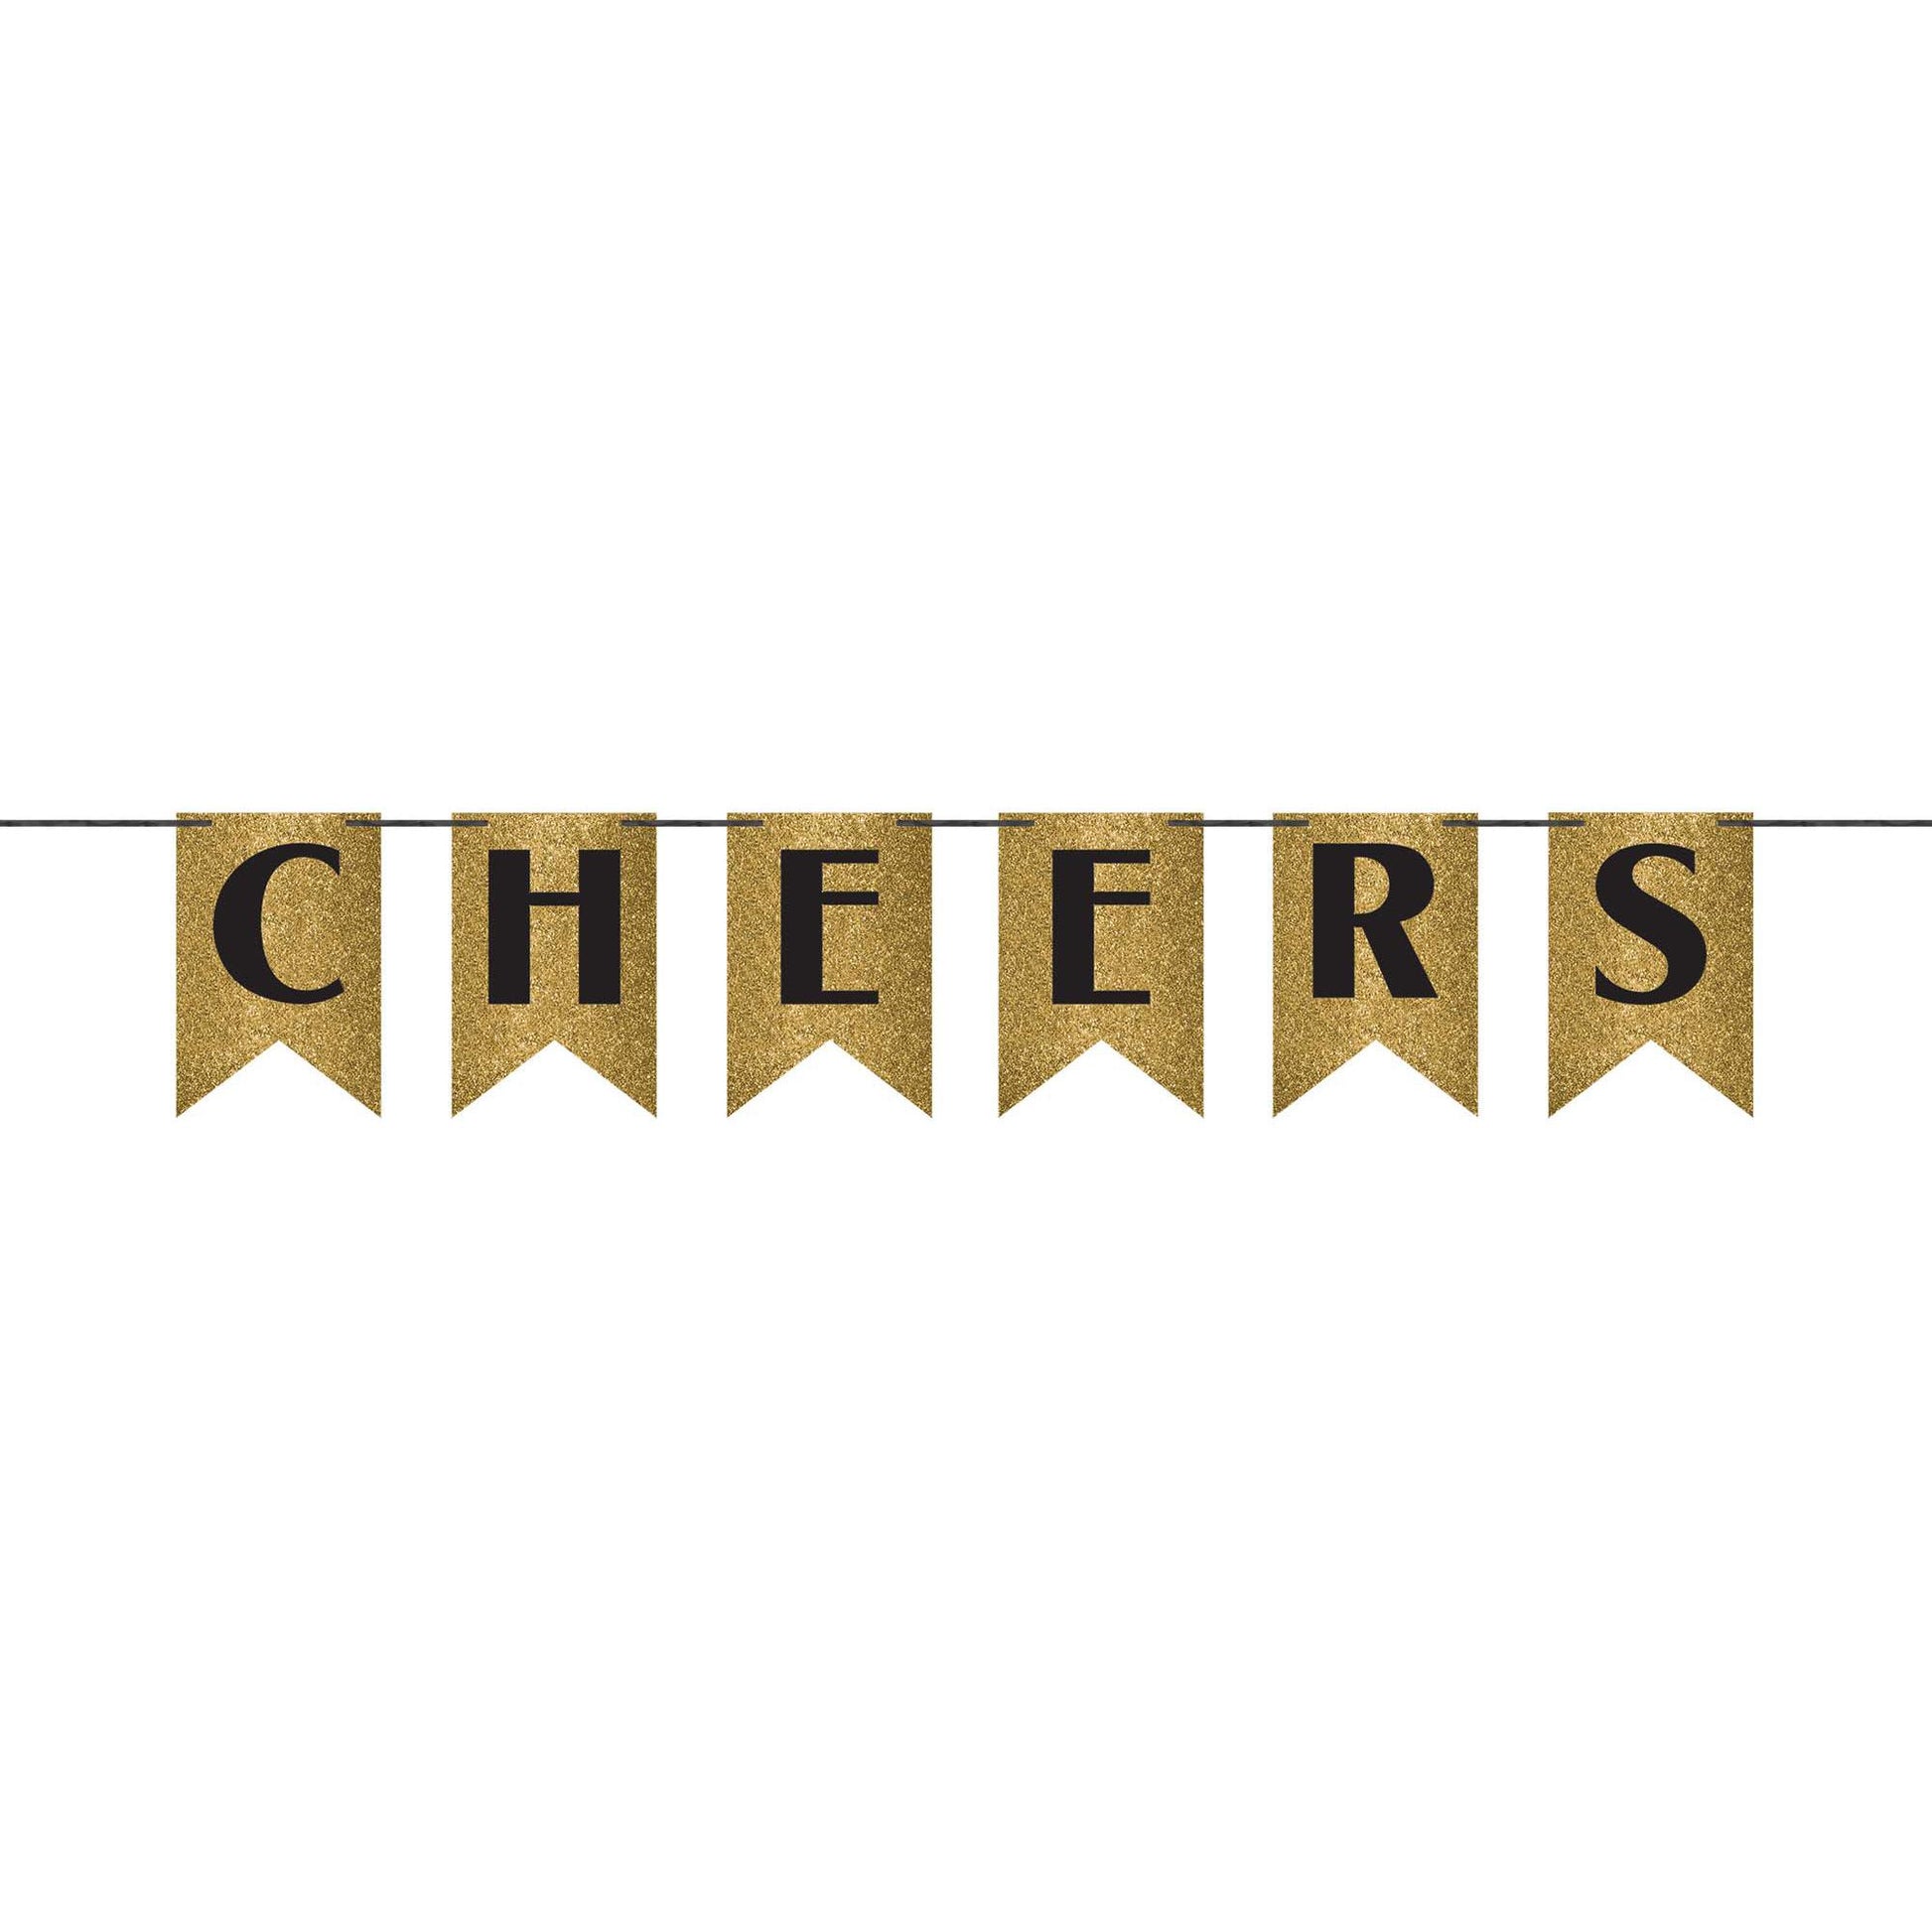 New Year Cheers Gold Pennant Banner Decorations - Party Centre